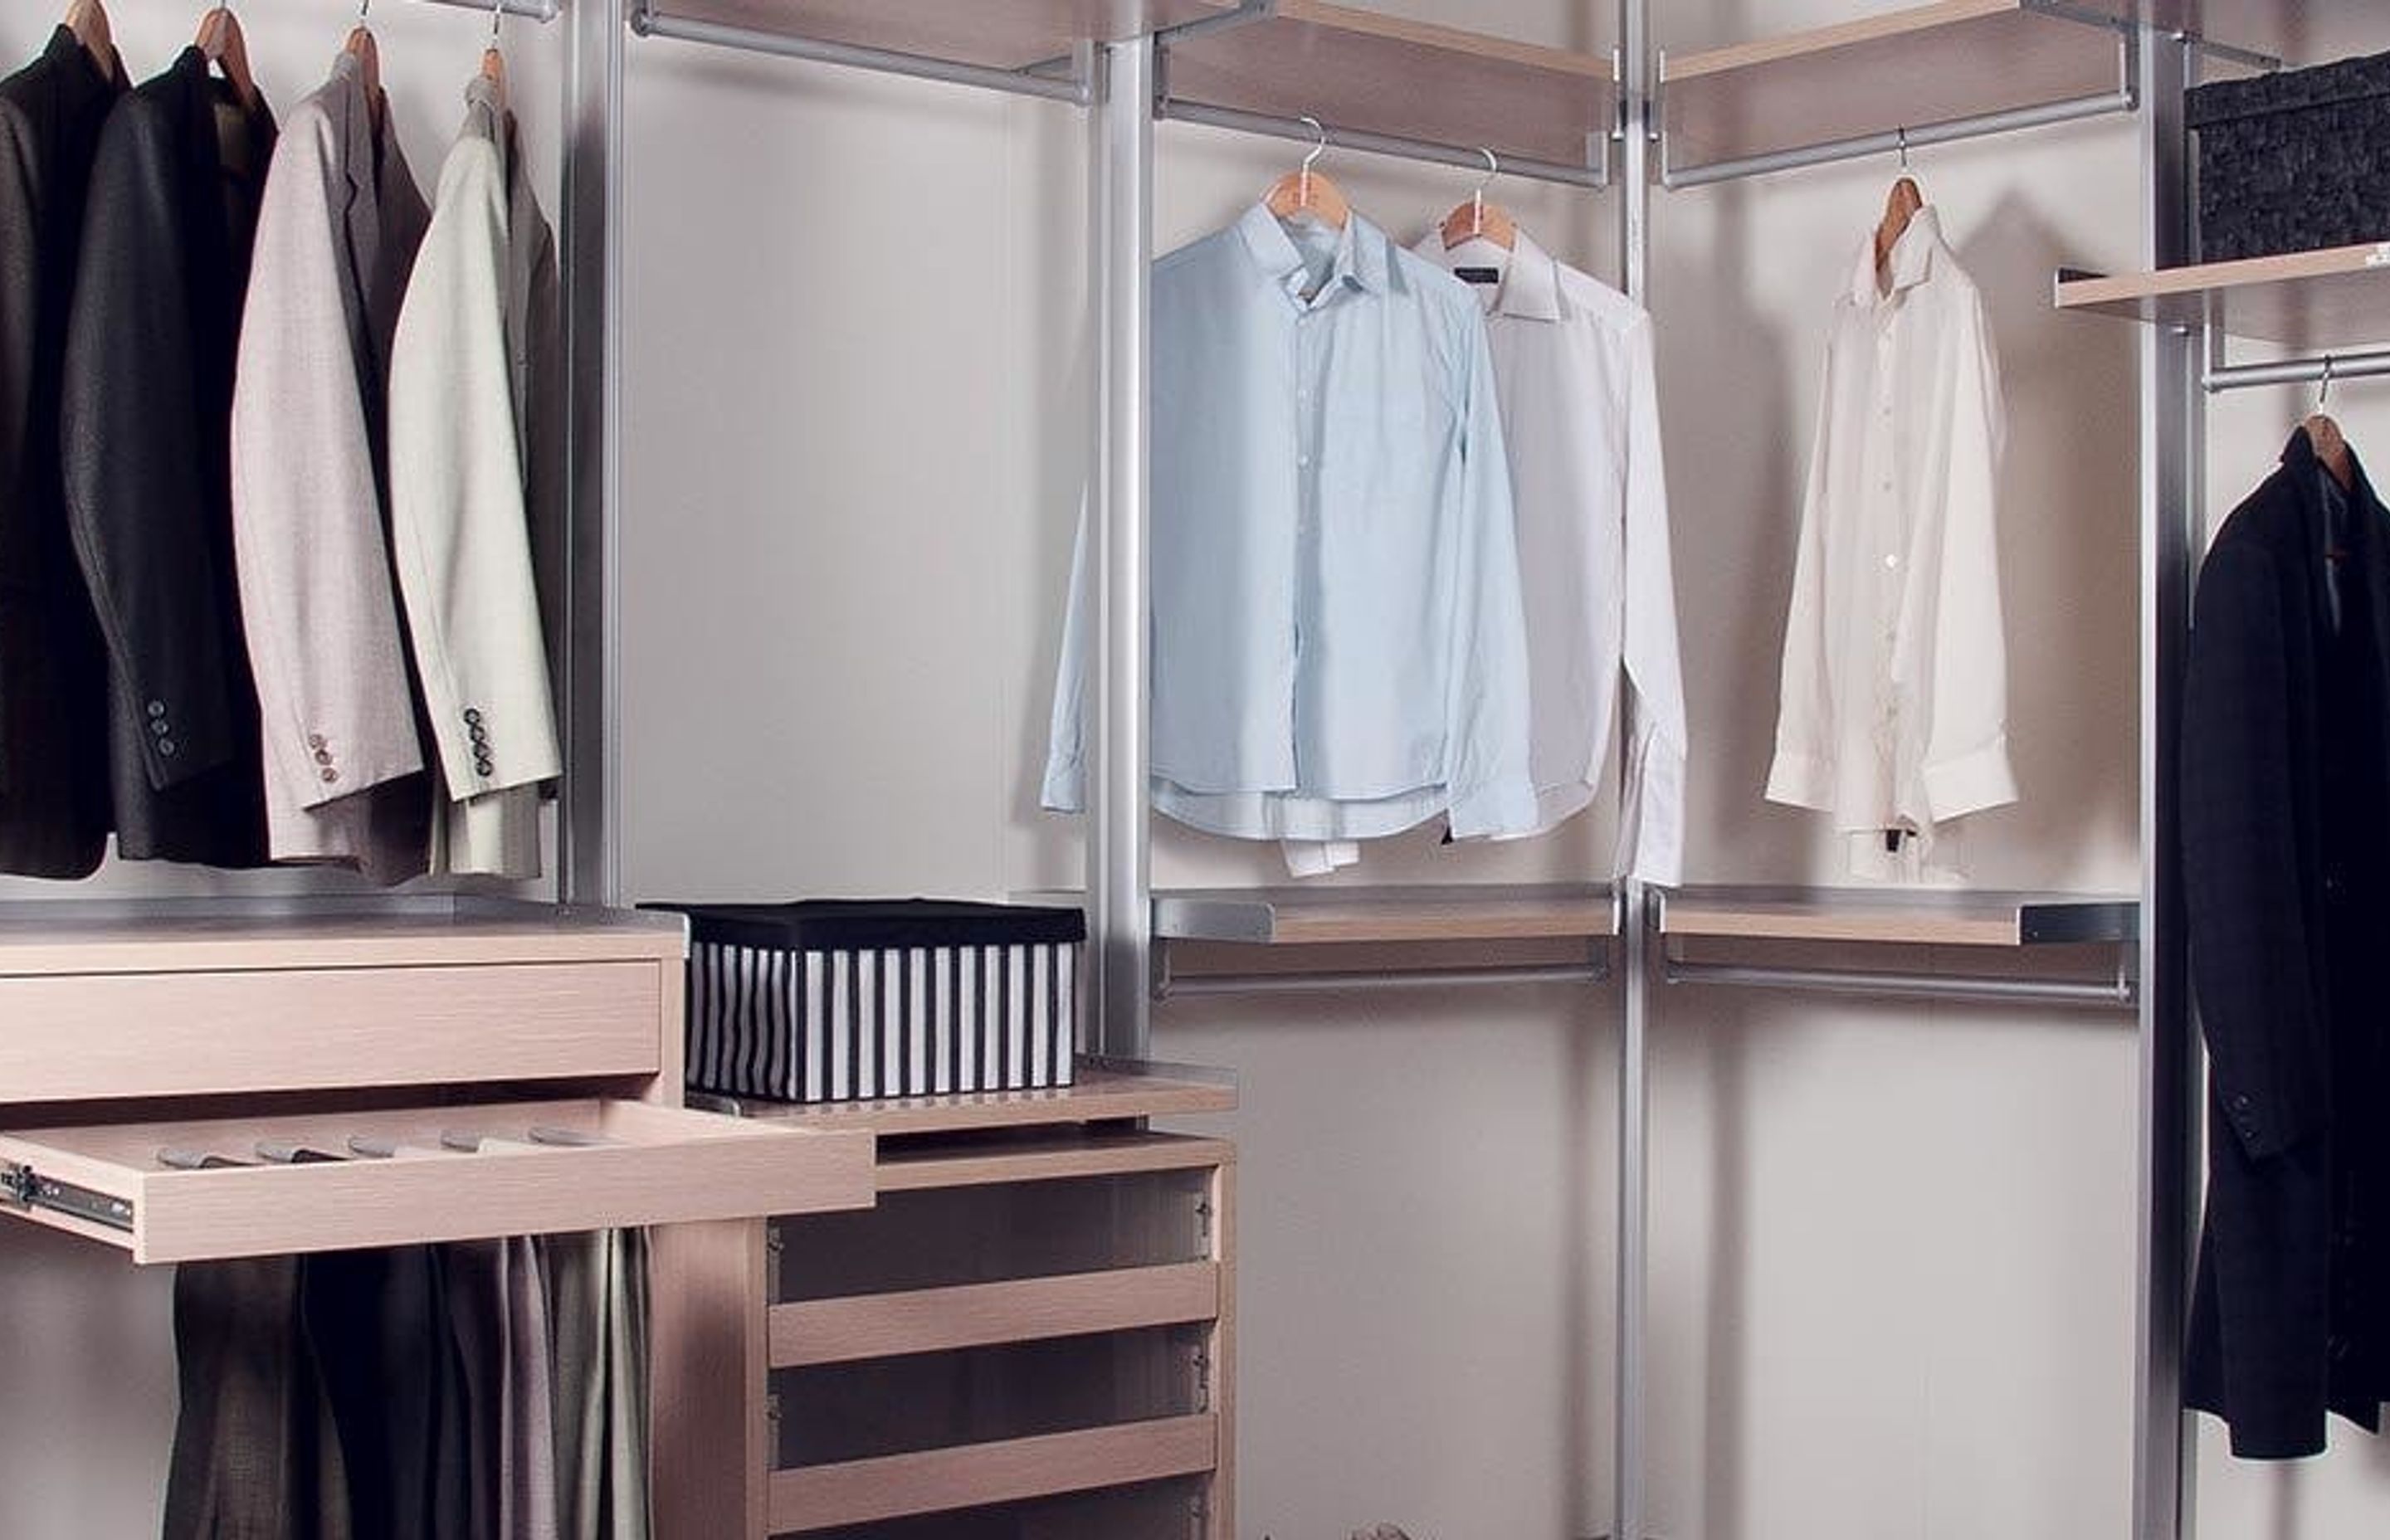 How Much Will A New Wardrobe Cost?